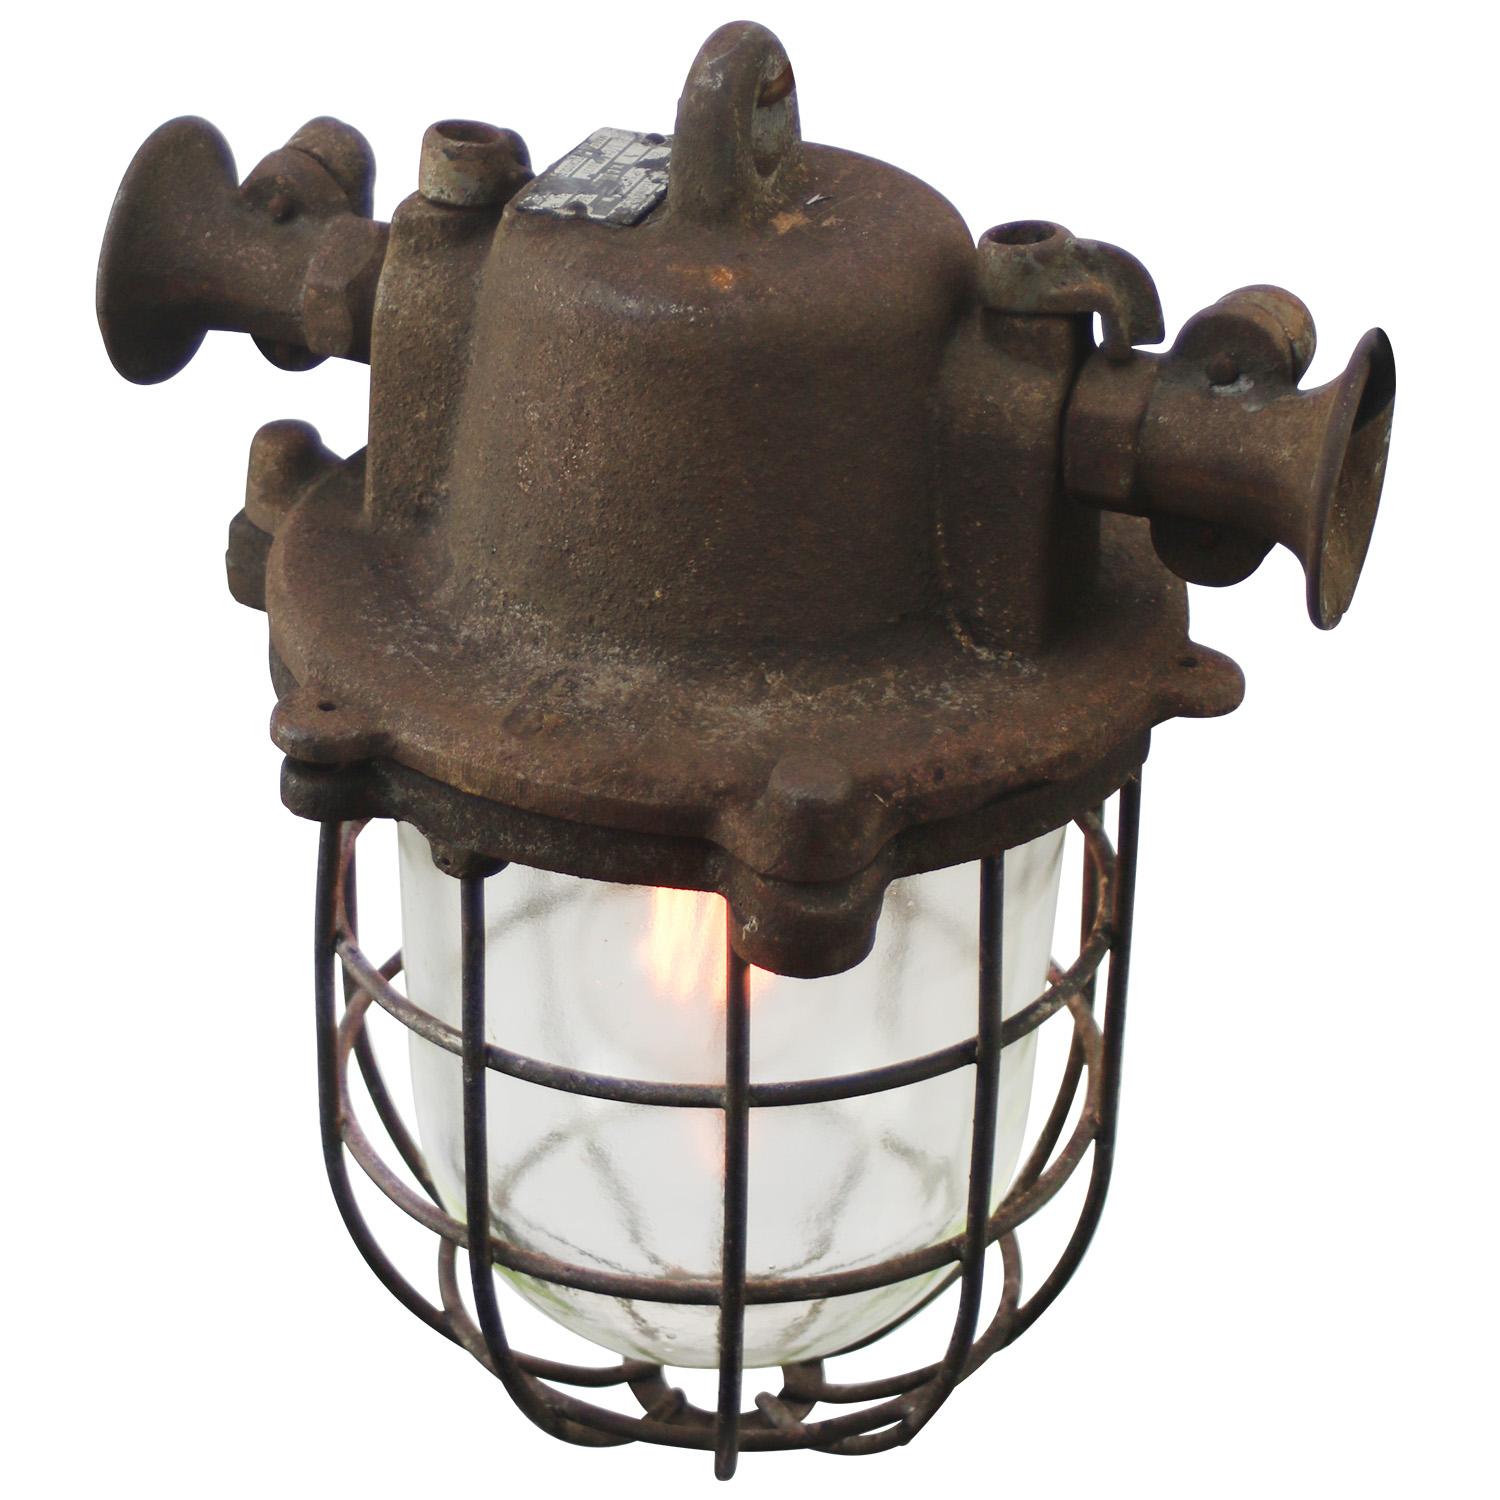 Industrial pendant lamp
Cast iron, clear glass

Weight 8.40 kg / 18.5 lb

Priced per individual item. All lamps have been made suitable by international standards for incandescent light bulbs, energy-efficient and LED bulbs. E26/E27 bulb holders and